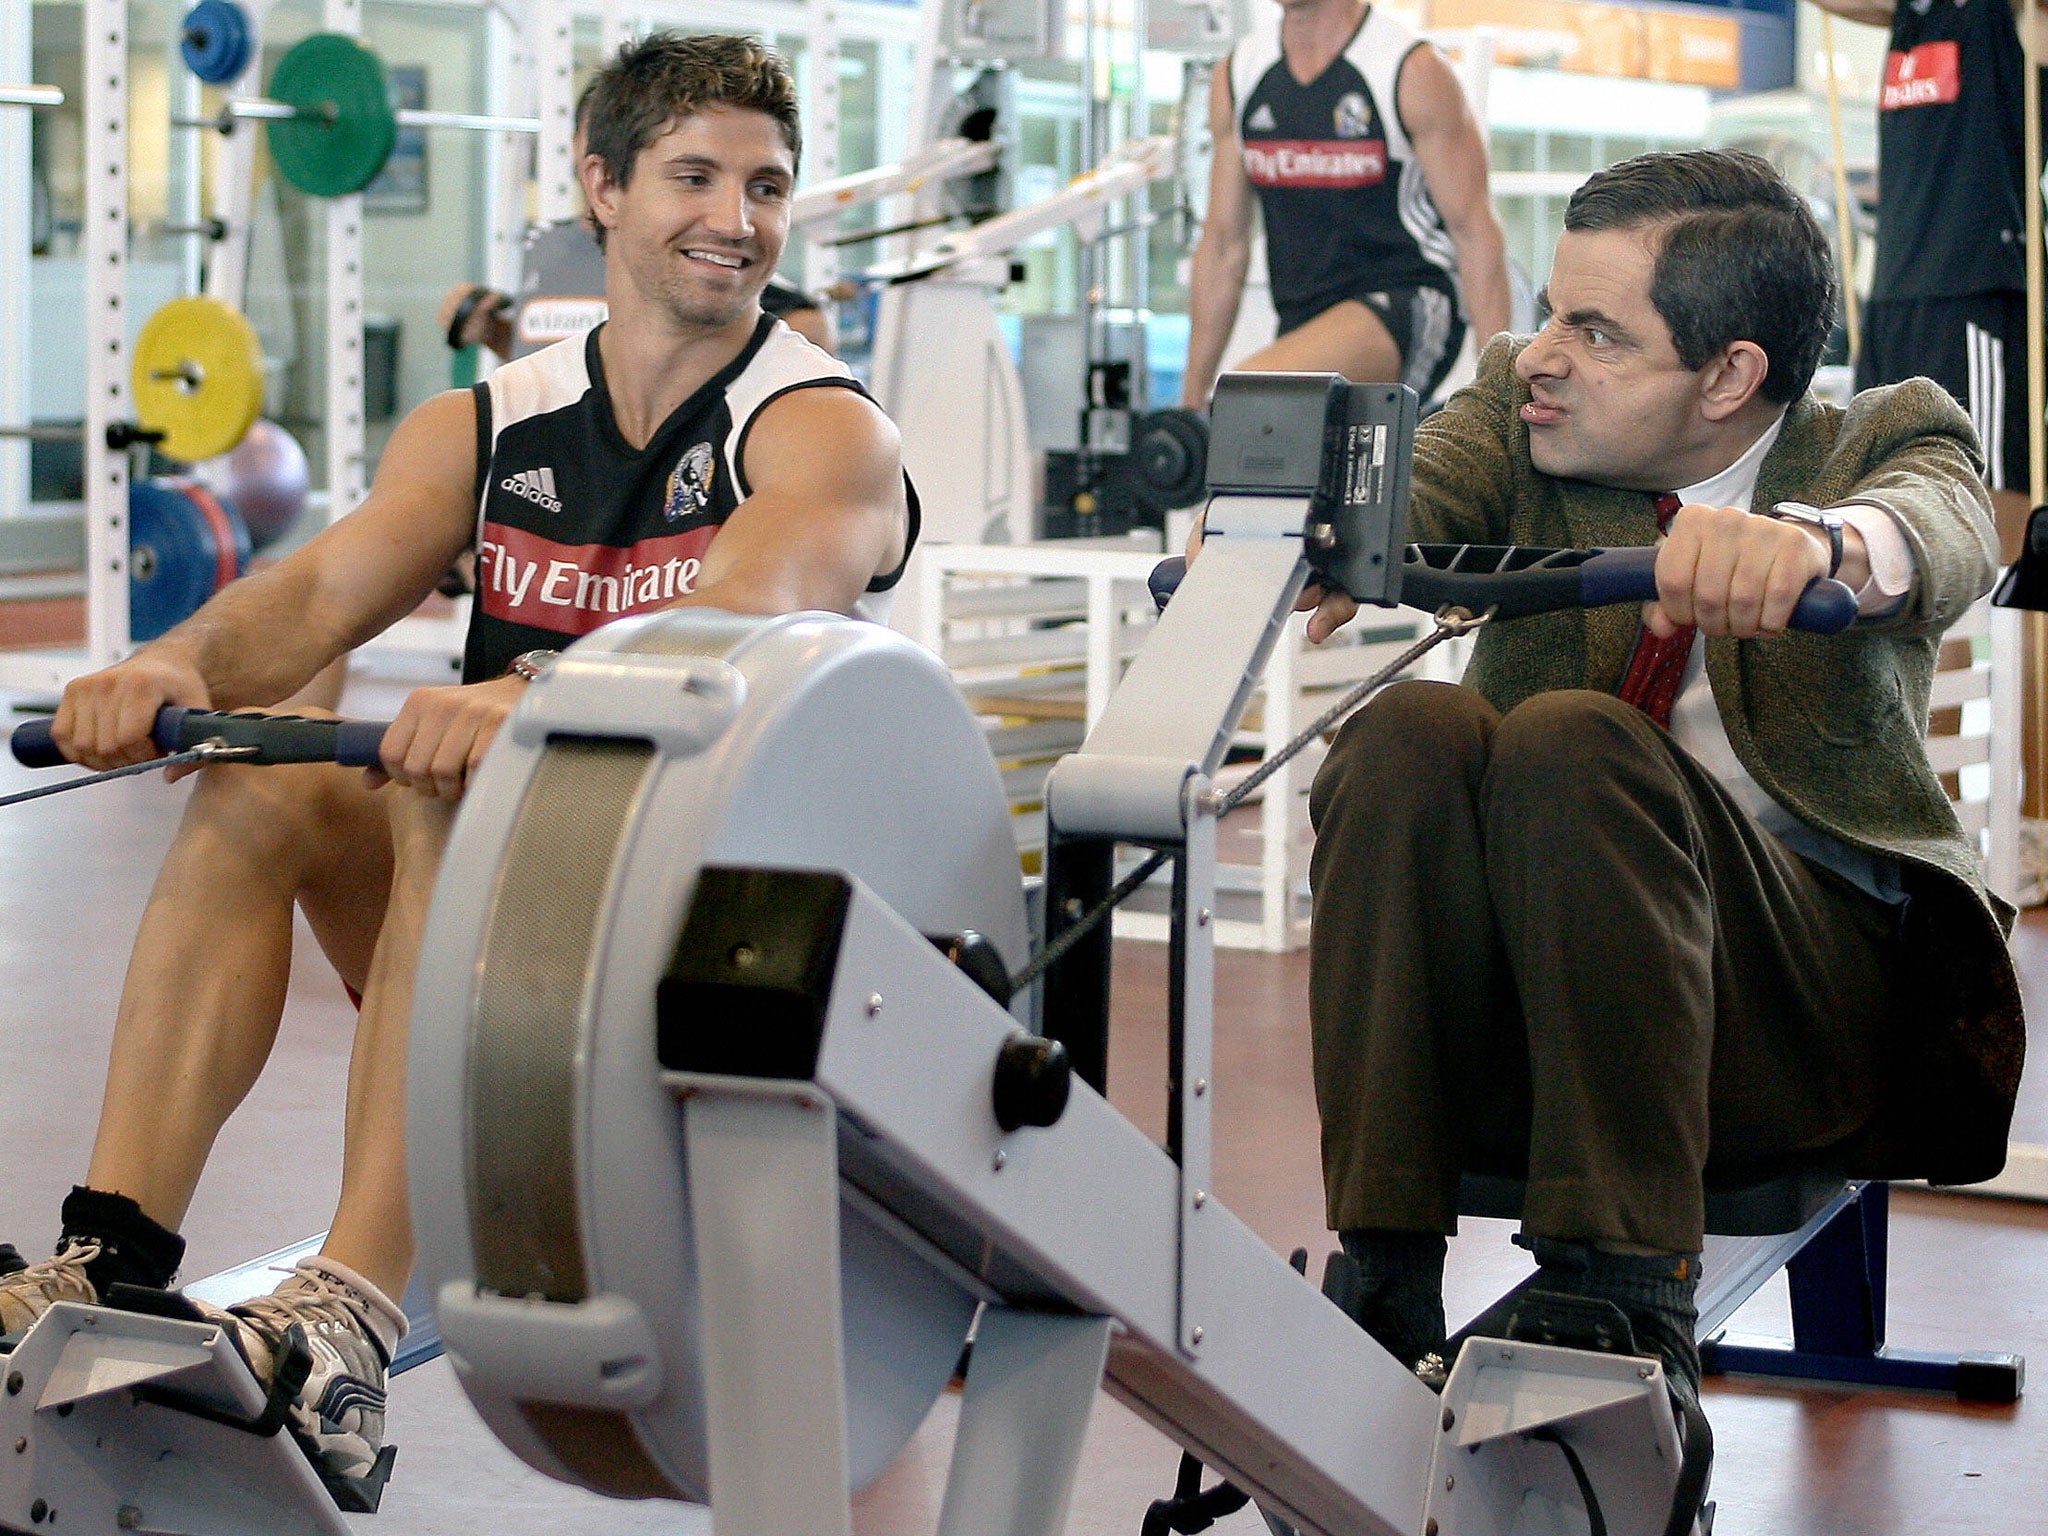 Actor Rowan Atkinson in character as Mr Bean trains on a rowing machine as Brodie Holland of the Magpies looks on during the Collingwood Magpies AFL gym training session at the Lexus Centre on March 9, 2007 in Melbourne, Australia.